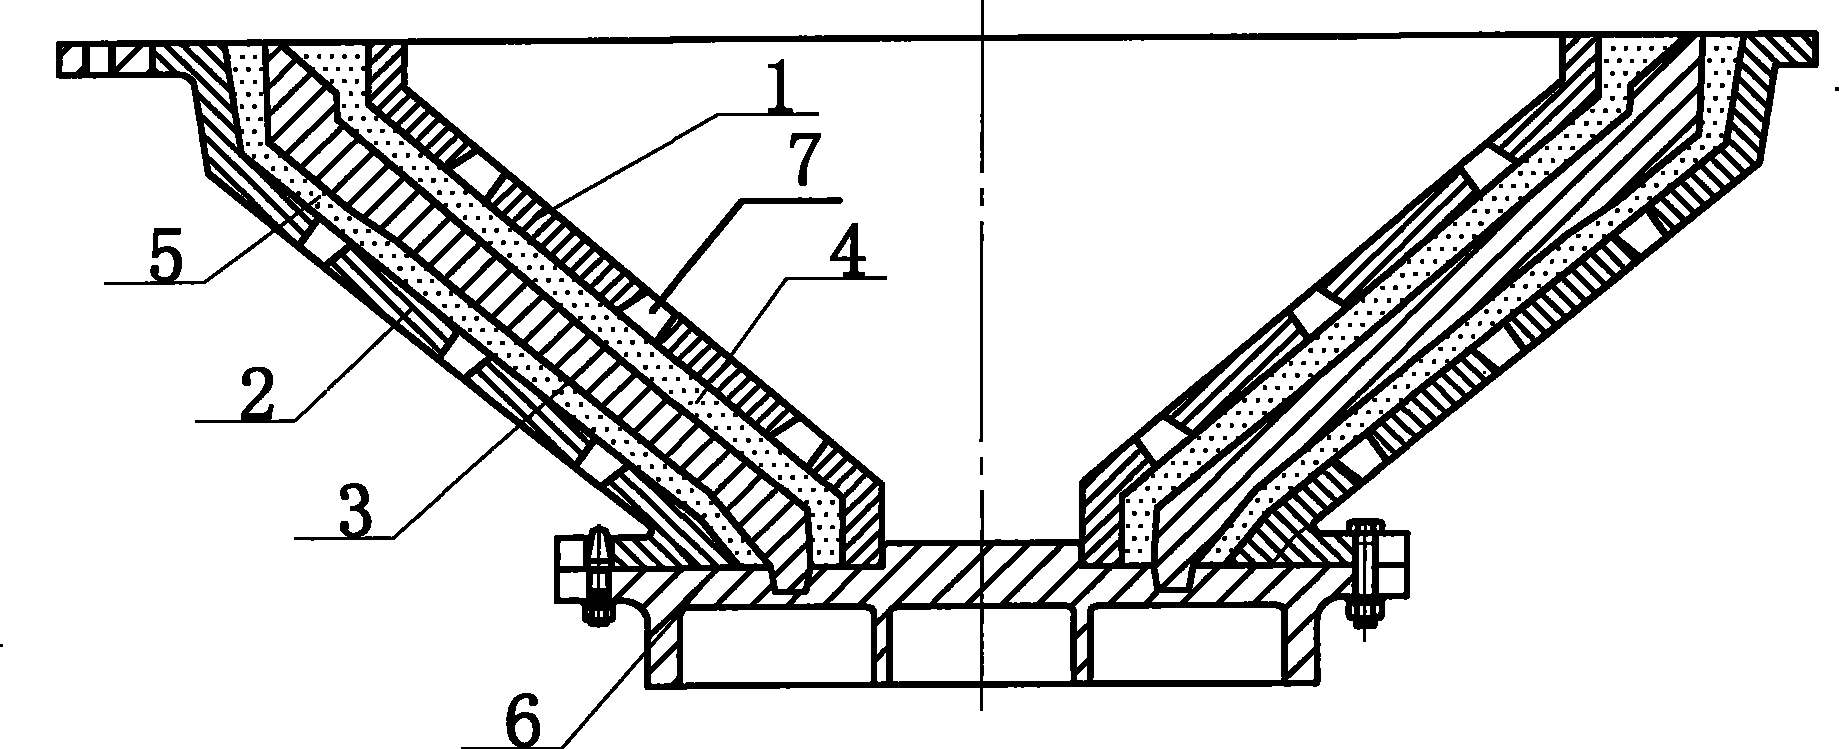 Method for manufacturing metal molds used for casting manganese steel crushing walls or rolling motor walls of cone crushers